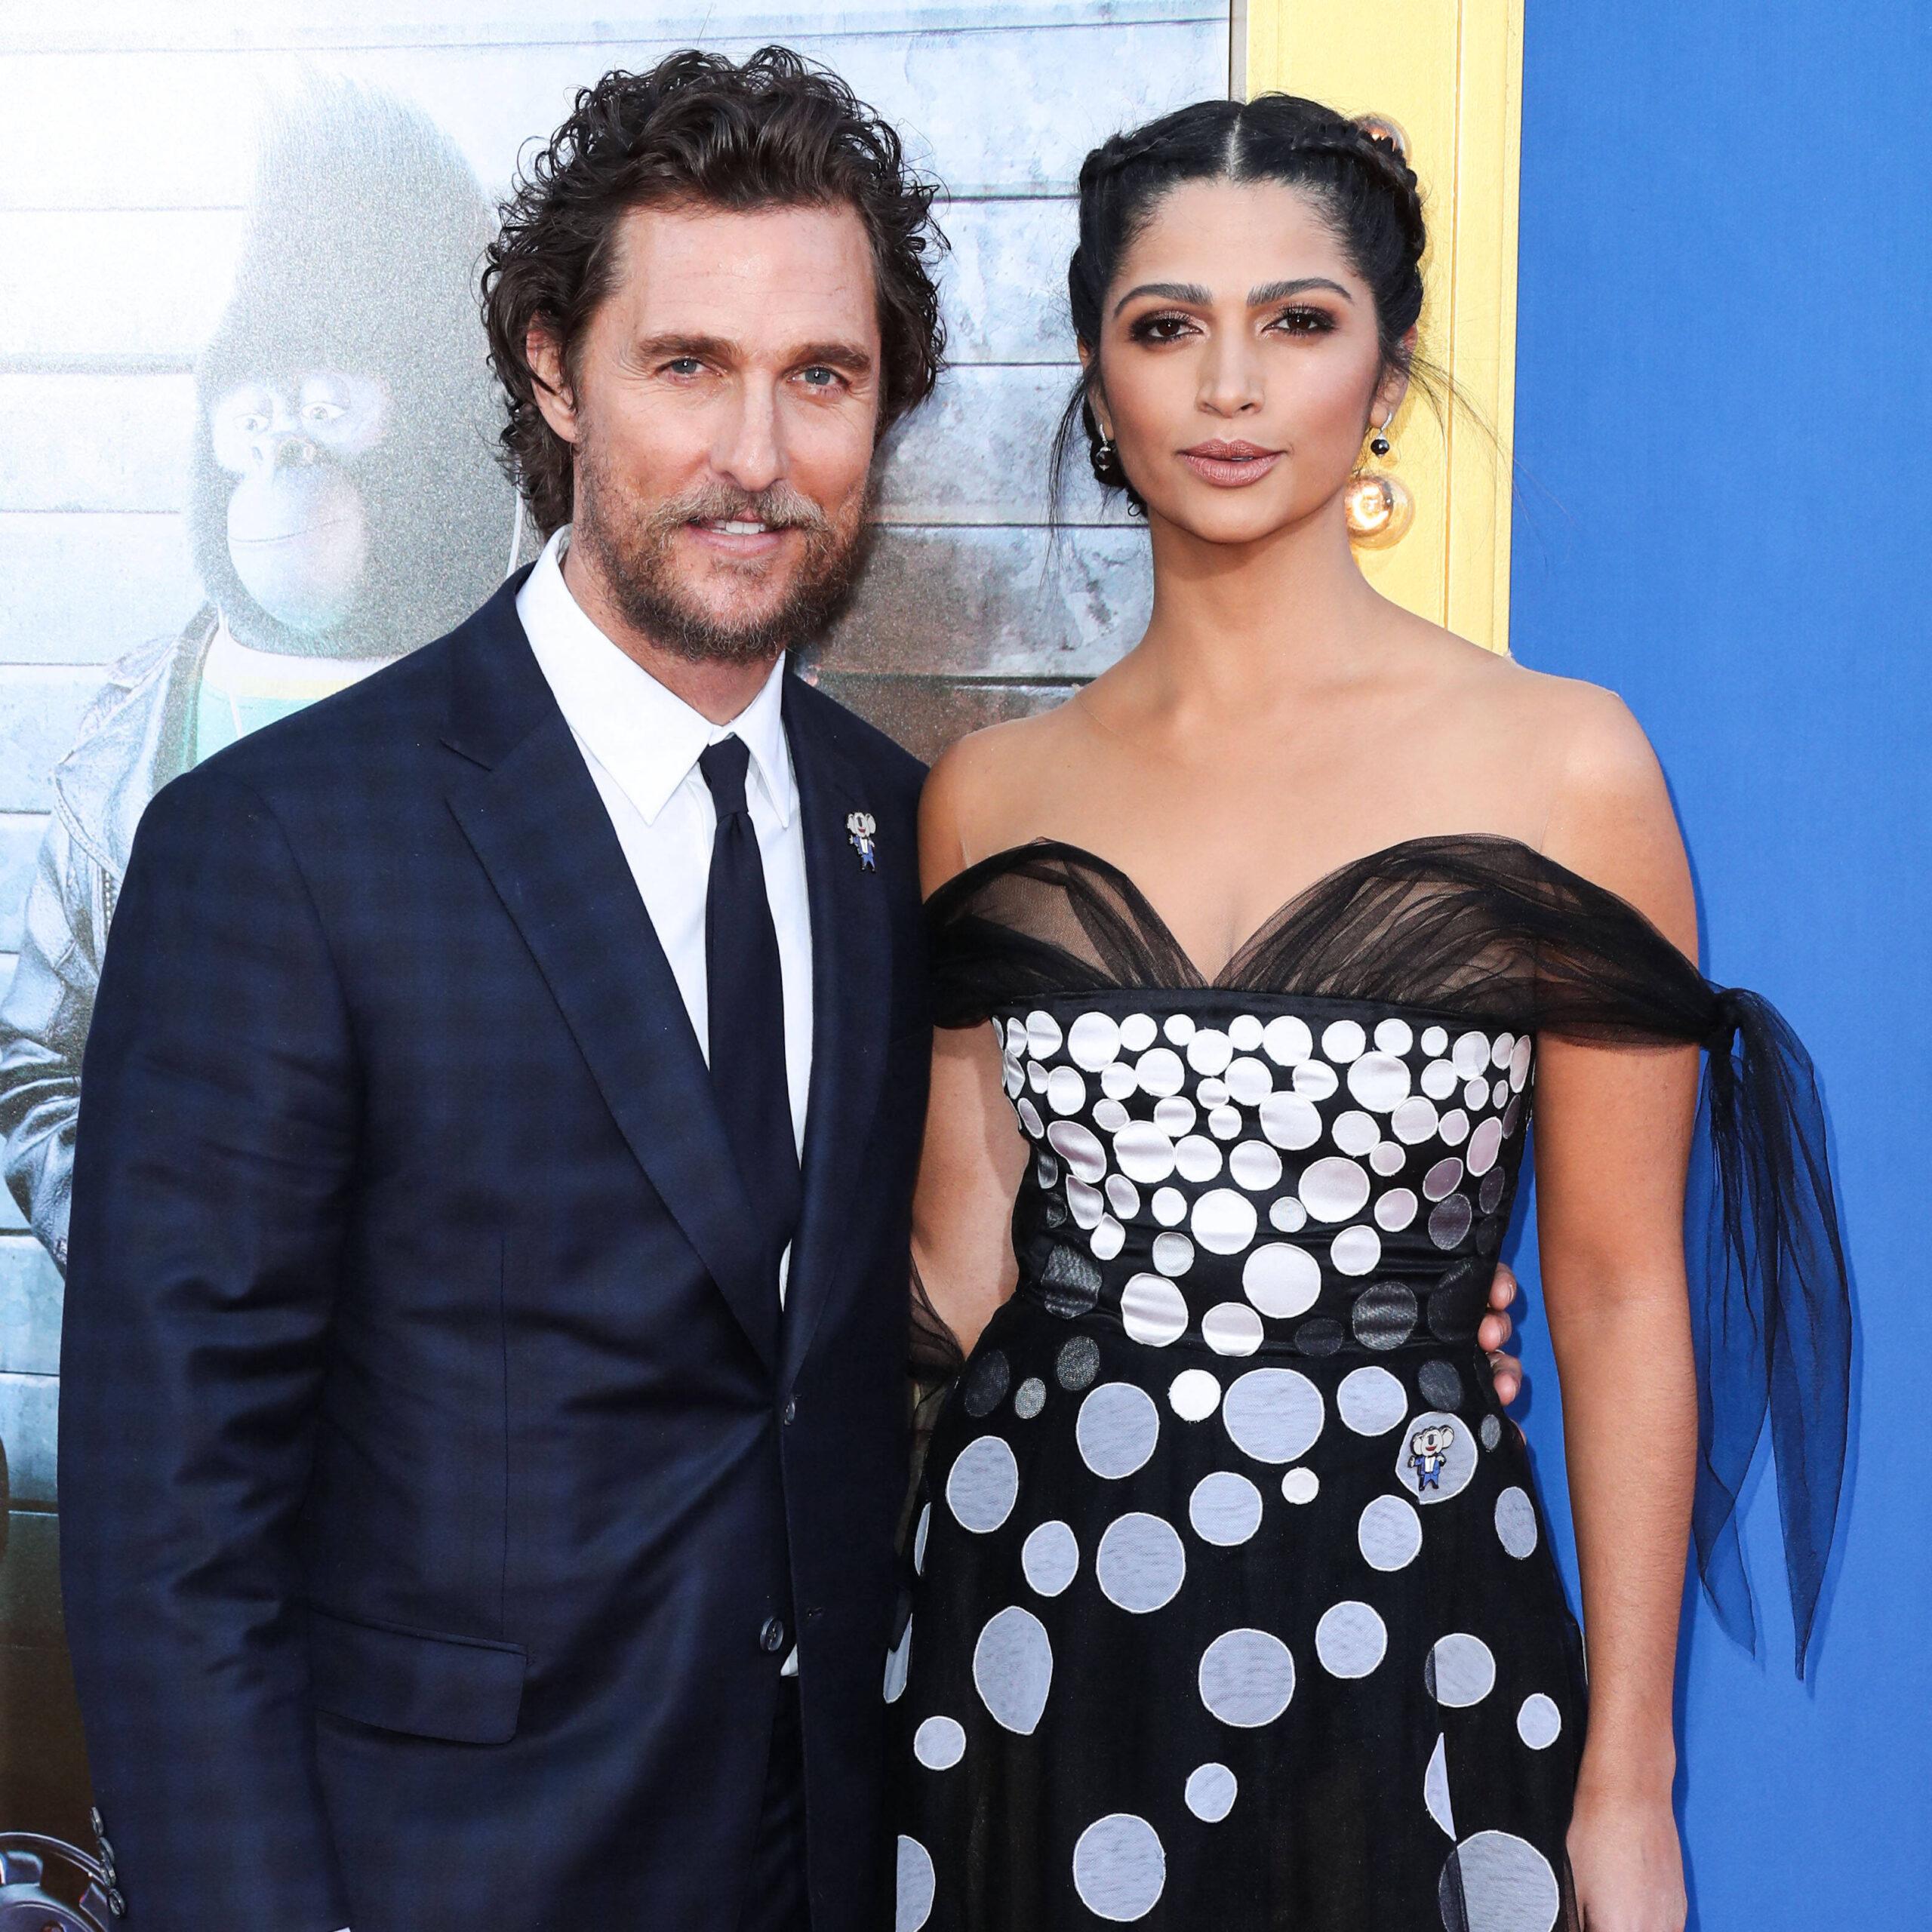 Matthew McConaughey Files Restraining Order Against 'Unhinged' Obsessed Fan